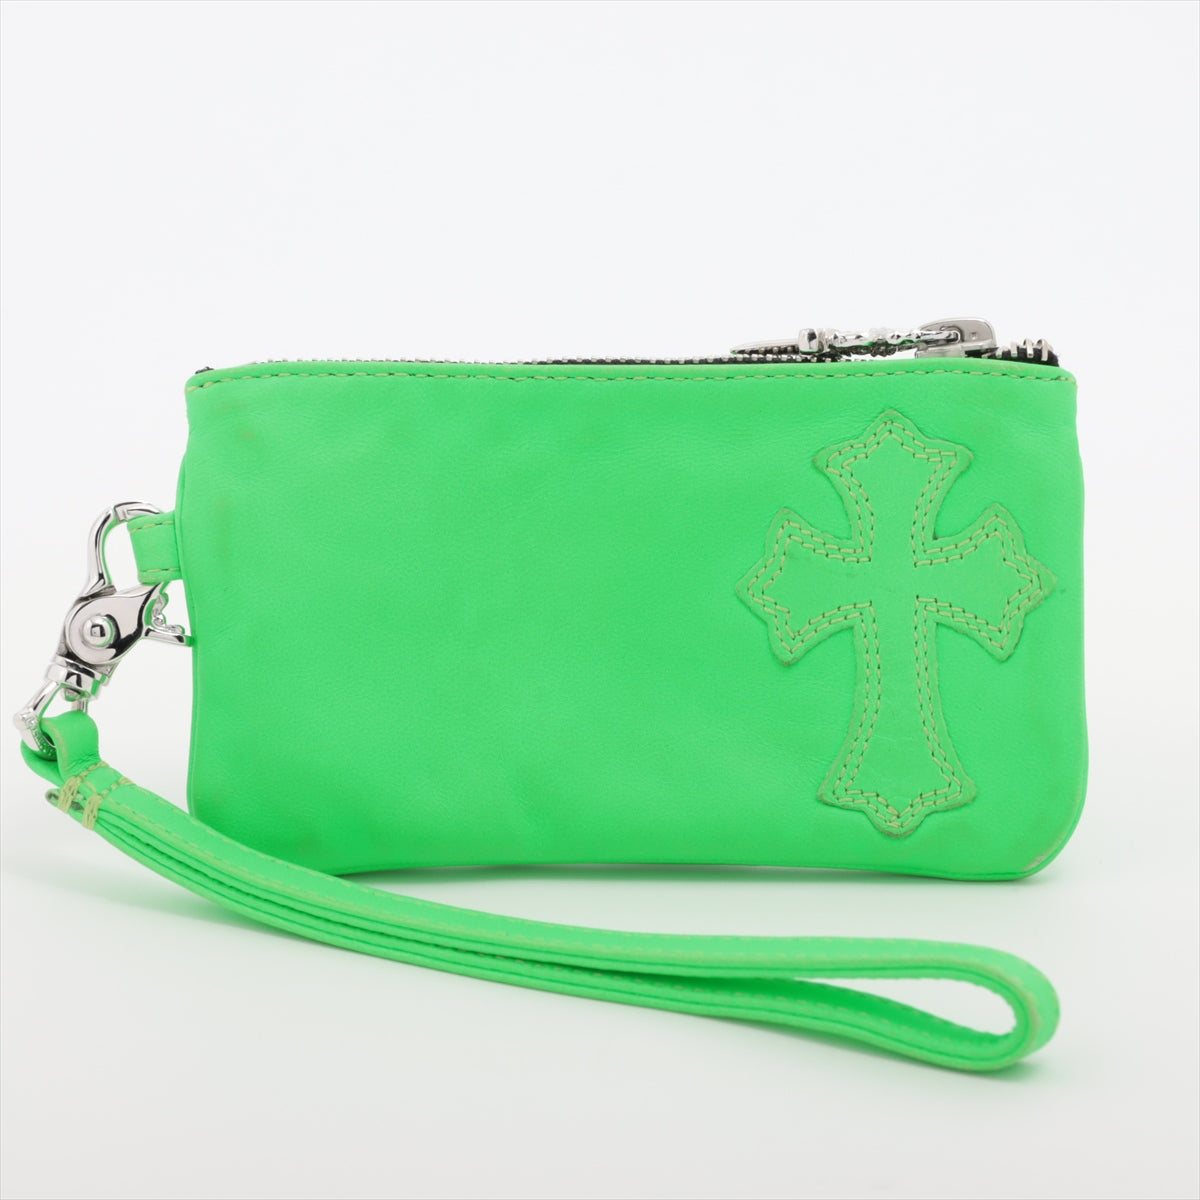 Chrome Hearts Change Purse Coin Purse Leather & 925 green x silver Dagger zip With strap